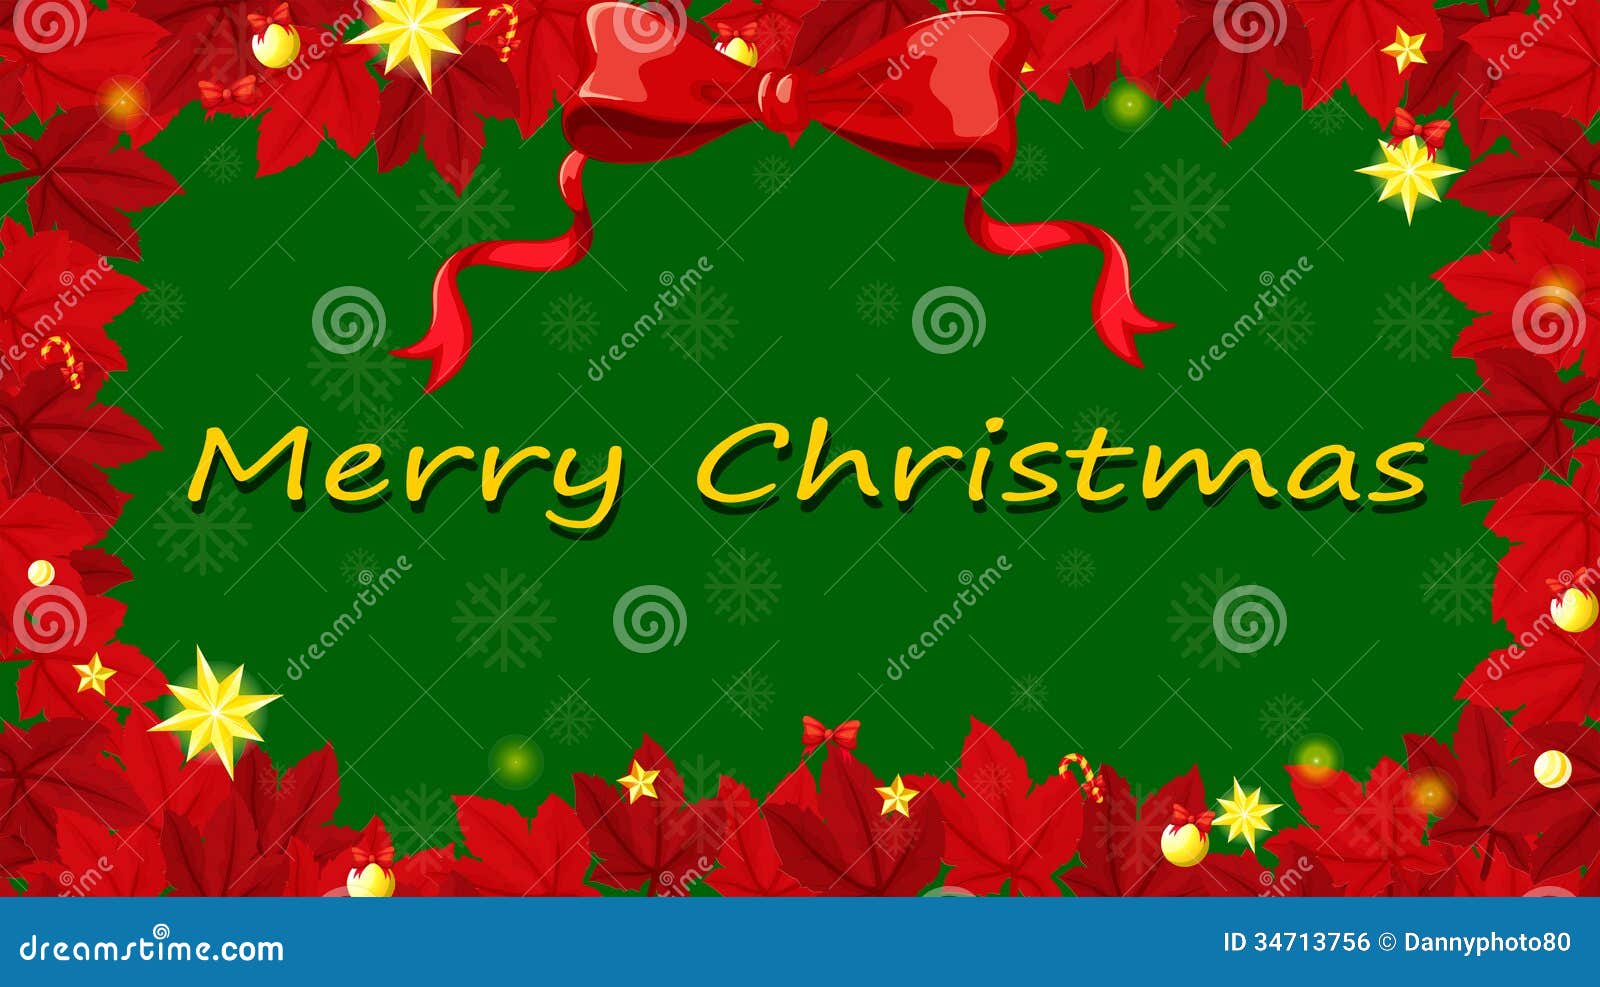 A Red And Green Christmas Card Template Stock Illustration Illustration Of Graphic Drawing 34713756